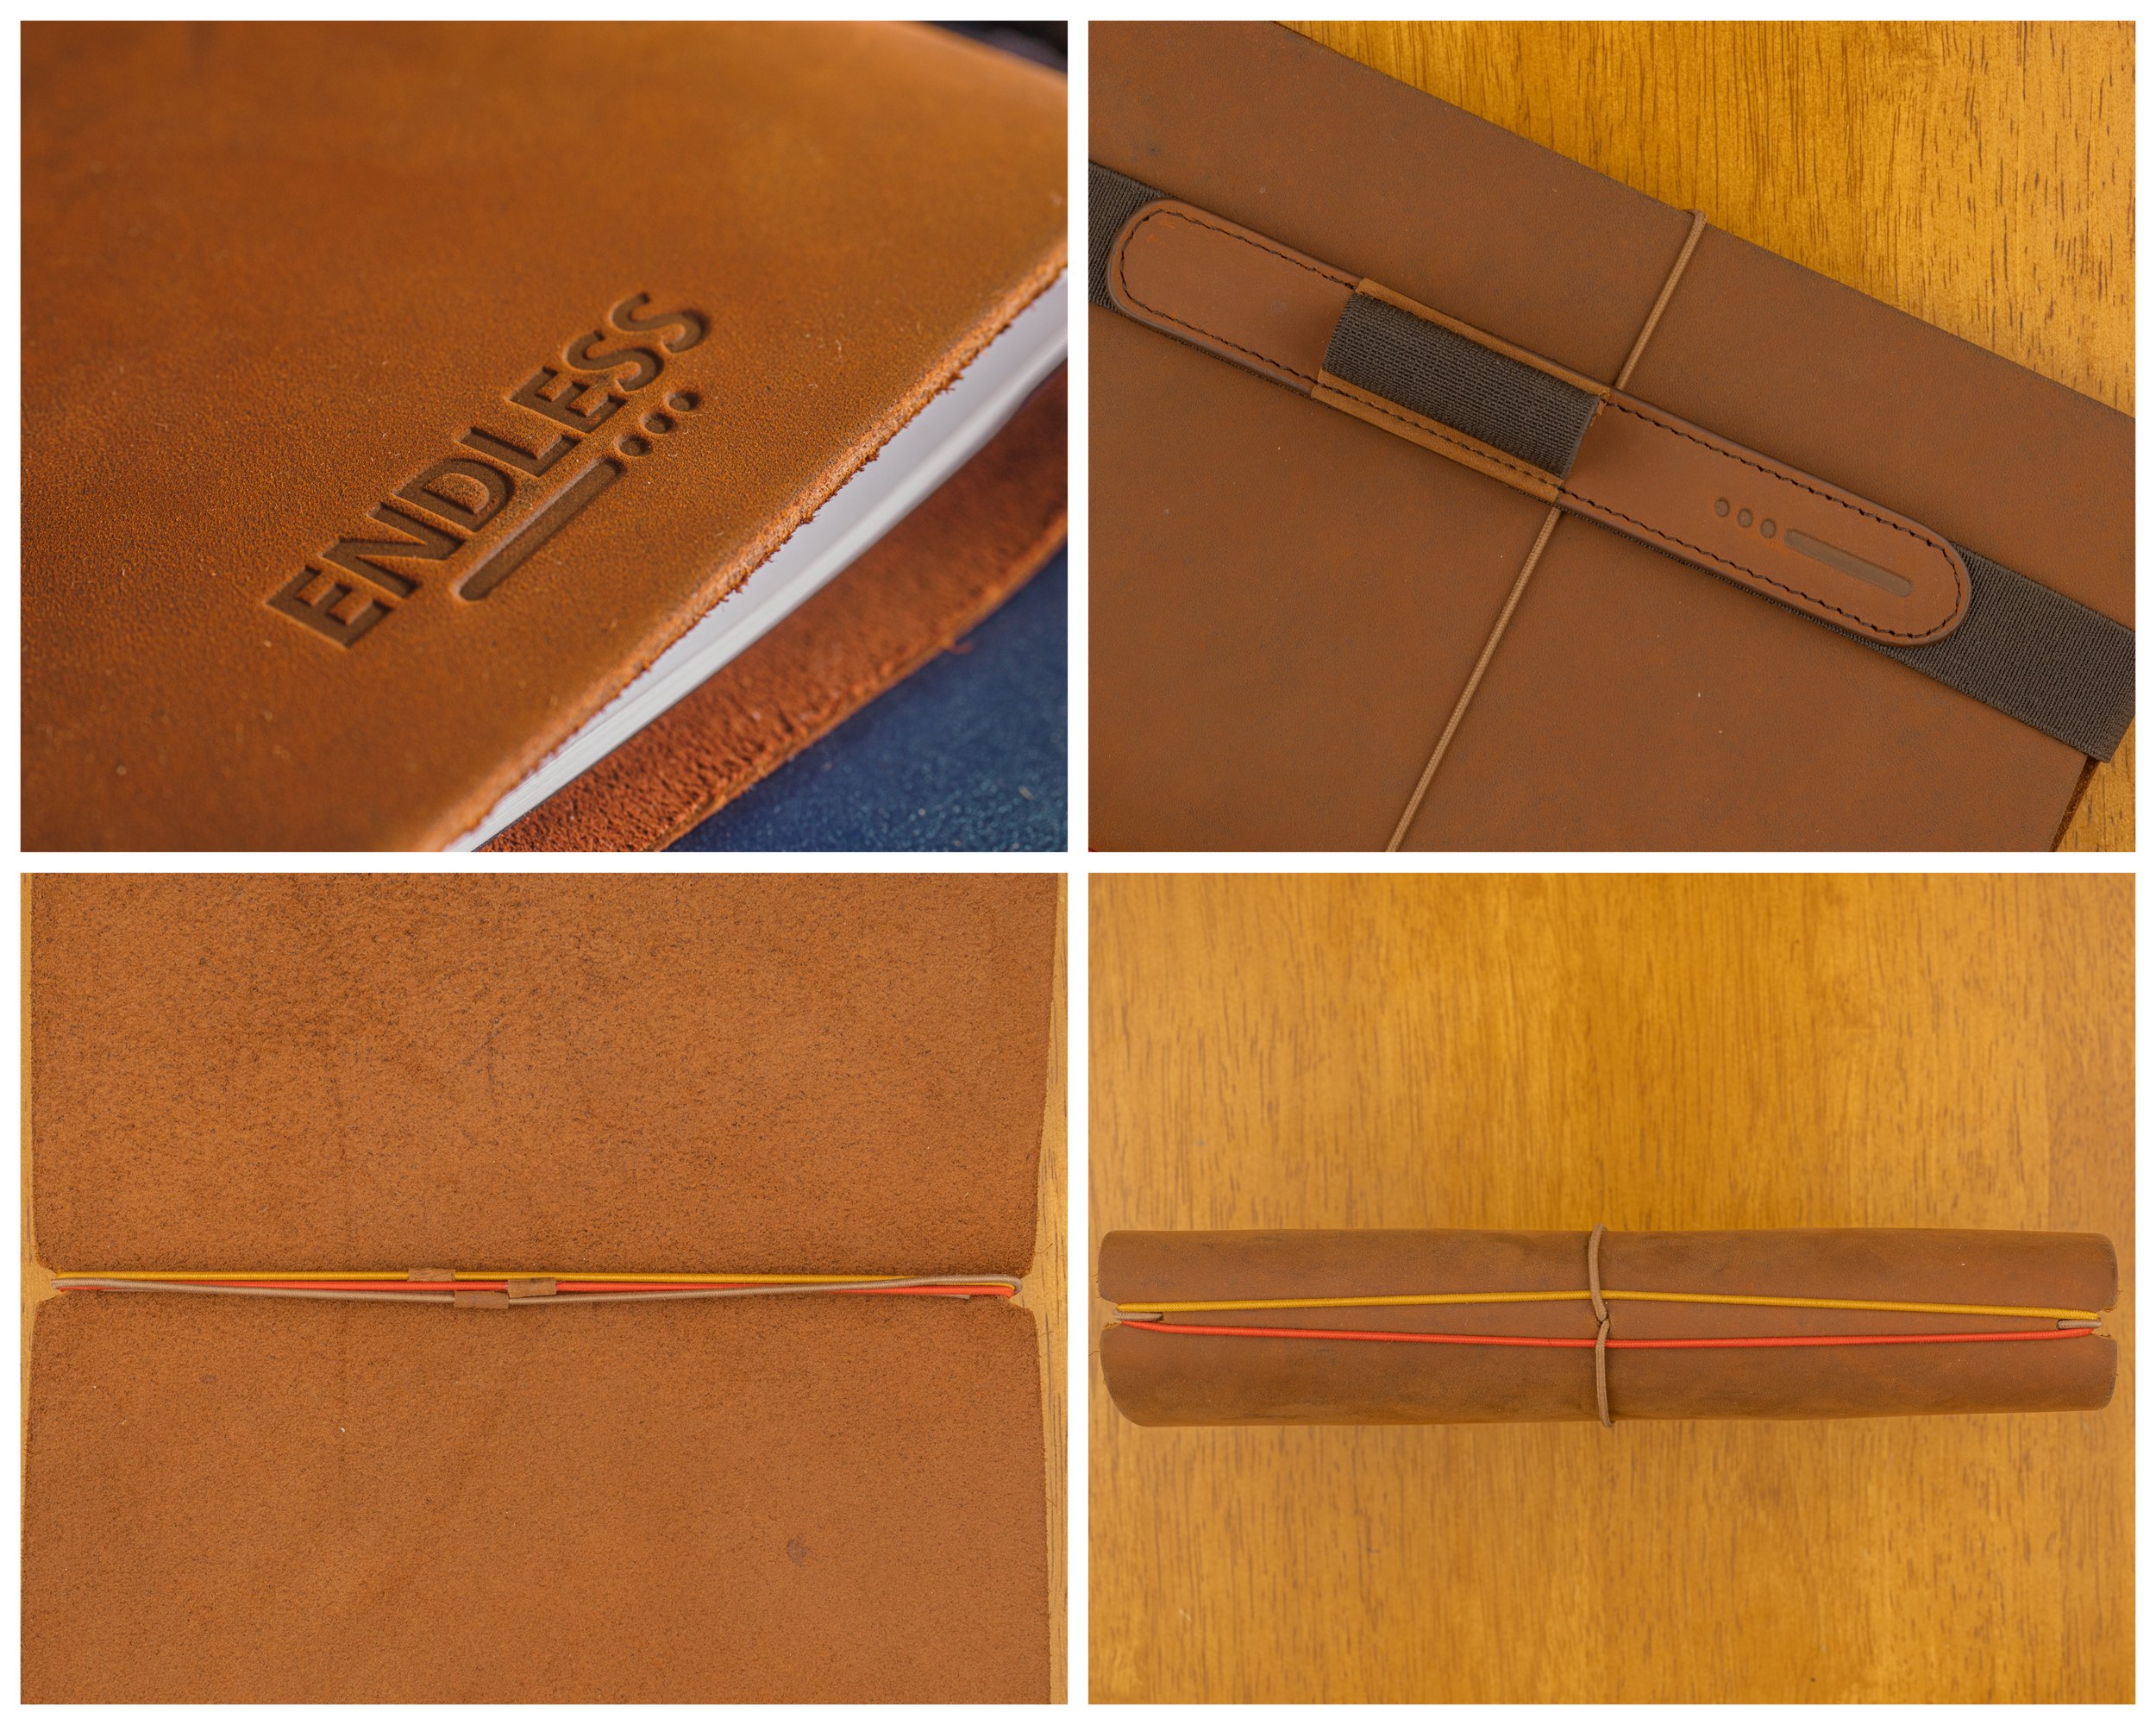 Endless Explorer A5 Refillable Leather Journal